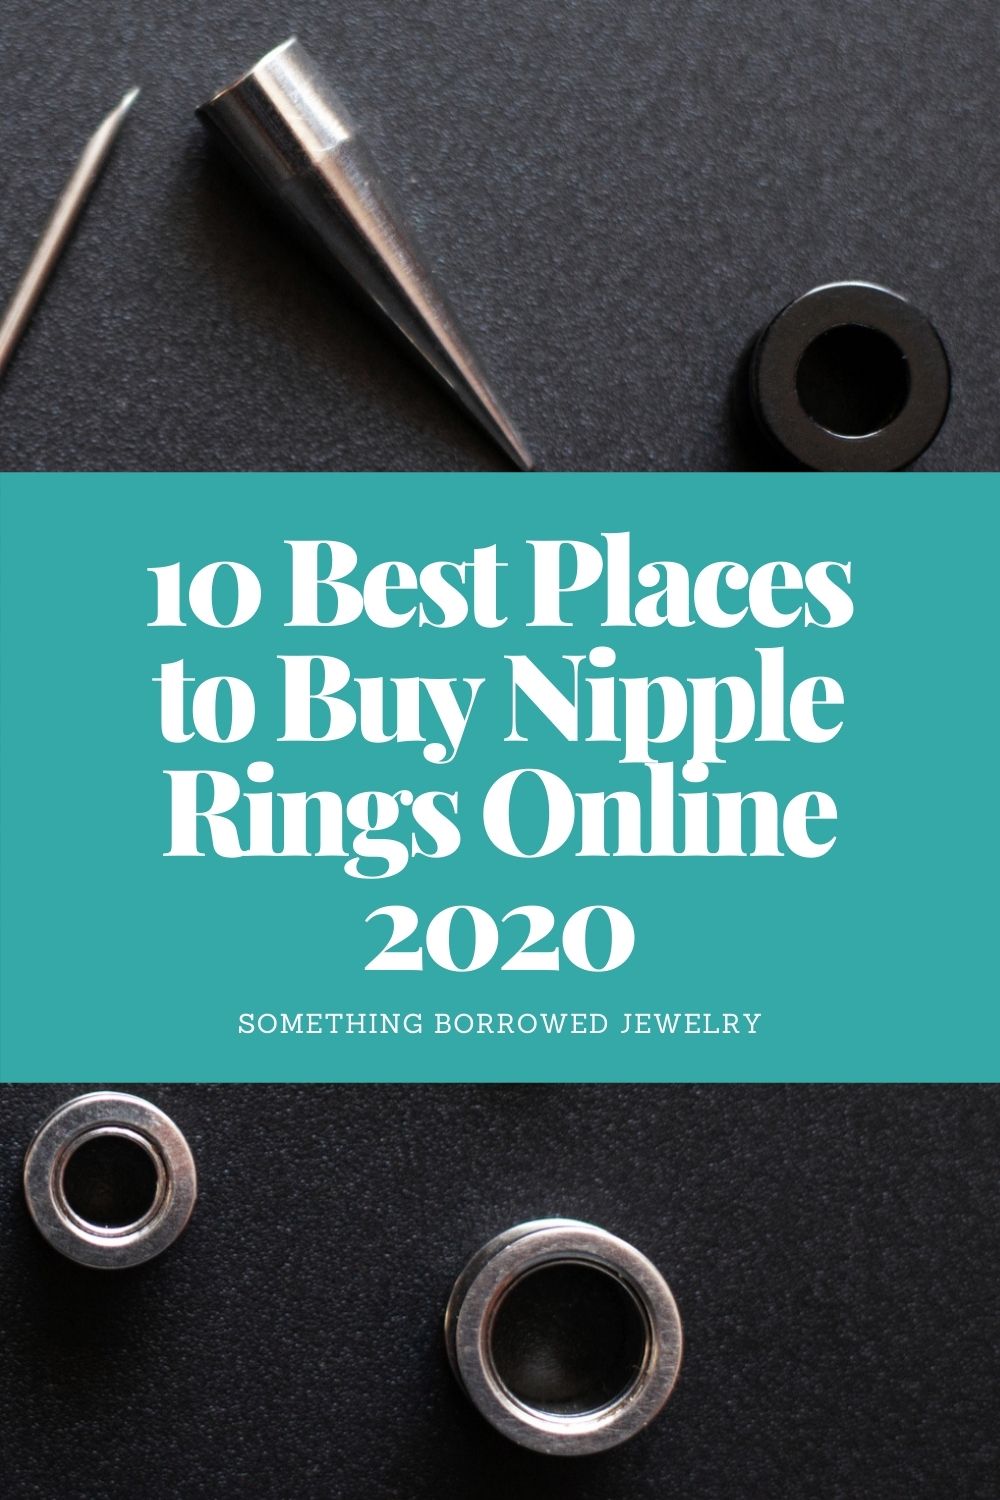 10 Best Places to Buy Nipple Rings Online 2020 pin 2